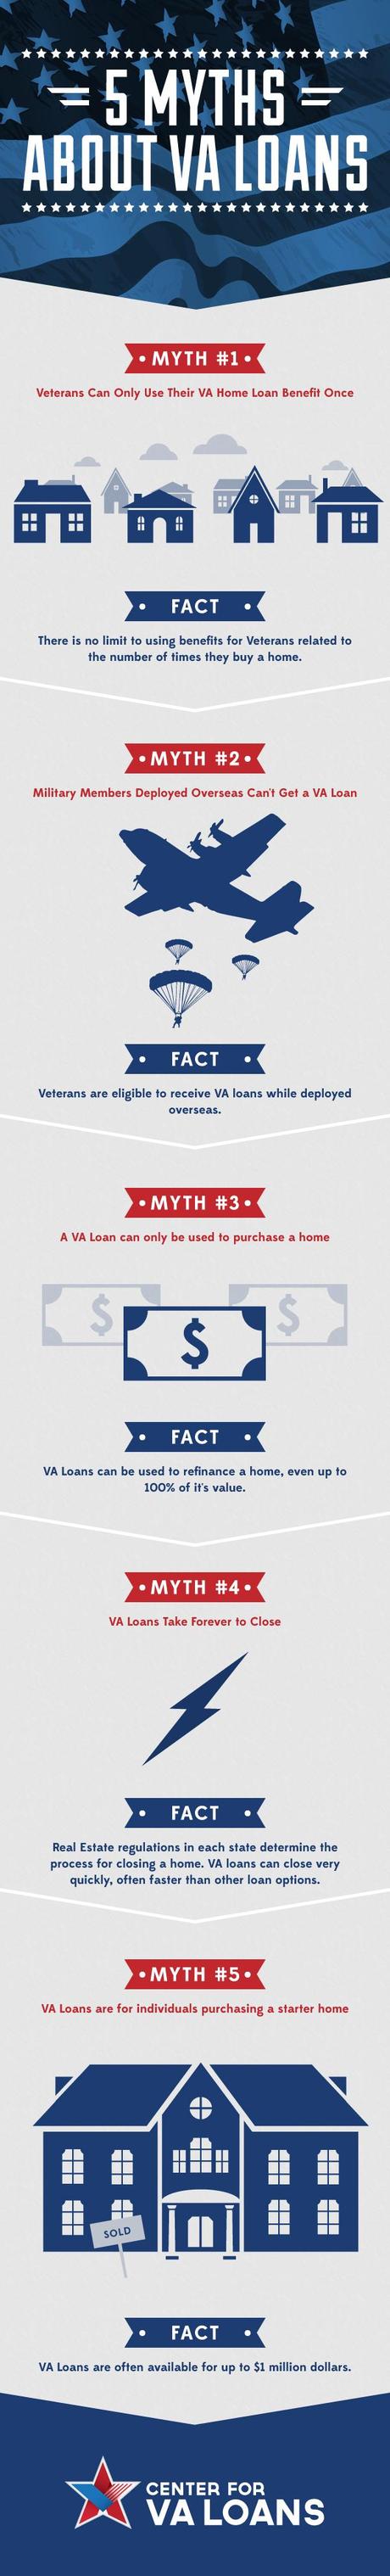 5 Facts About VA Loans Infographic